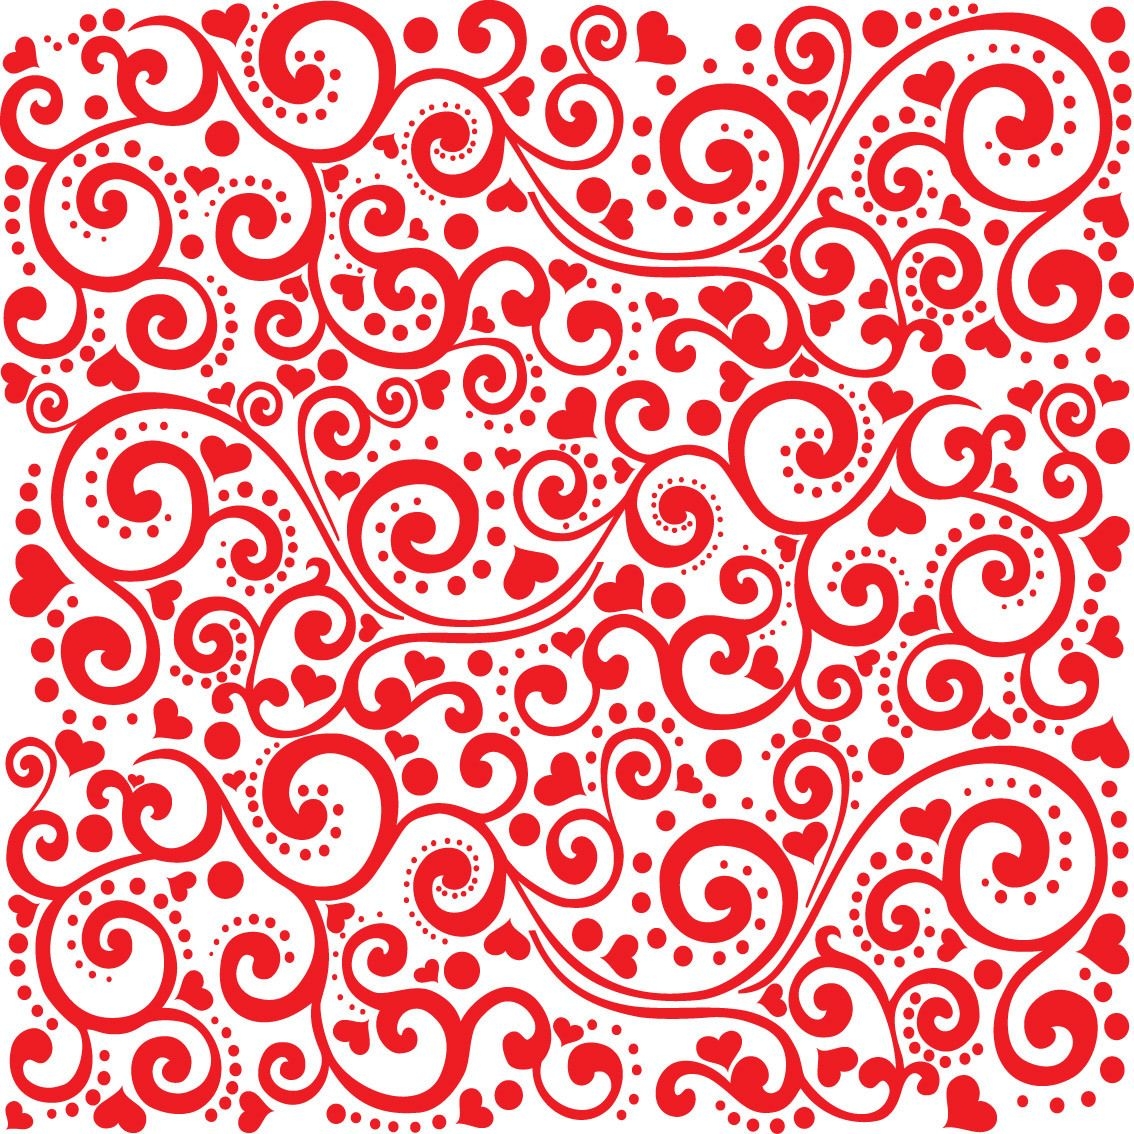 Swirling Floral & Heart Flat Red Background - Vector download